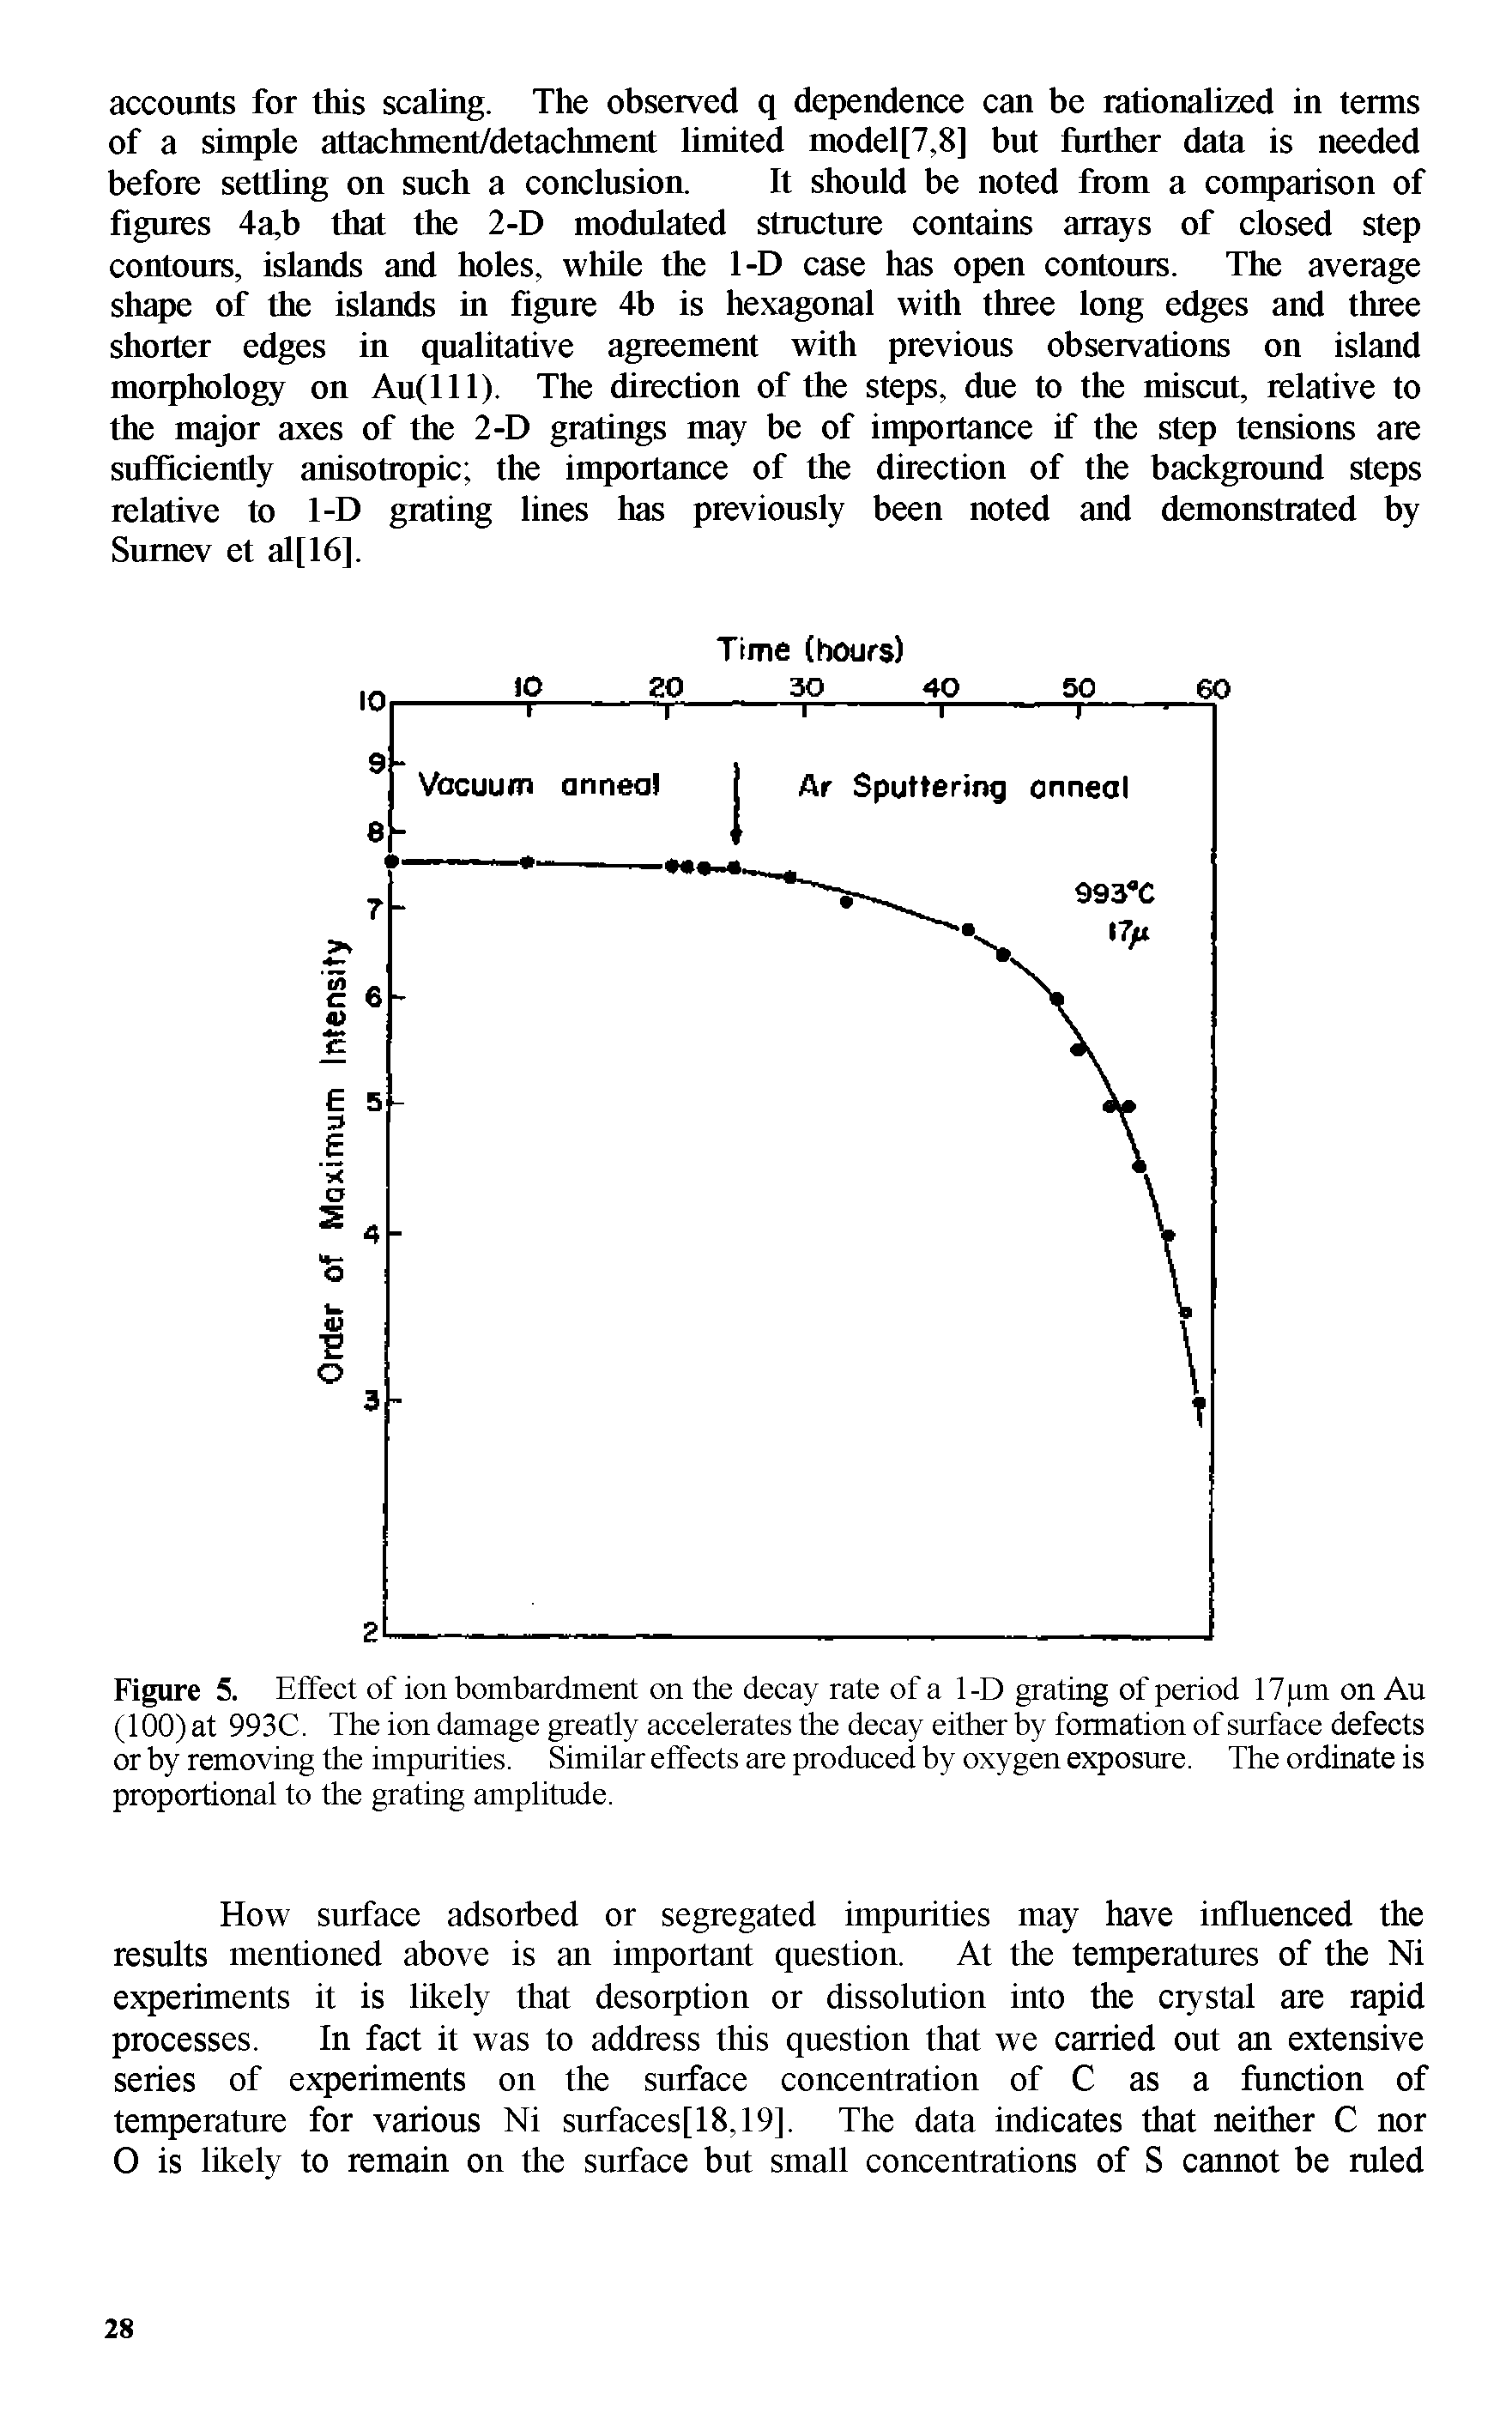 Figure 5. Effect of ion bombardment on the decay rate of a 1-D grating of period 17 pm on An (100) at 993C. The ion damage greatly accelerates the decay either by formation of surface defects or by removing the impurities. Similar effects are produced by oxygen exposure. The ordinate is proportional to the grating amplitude.